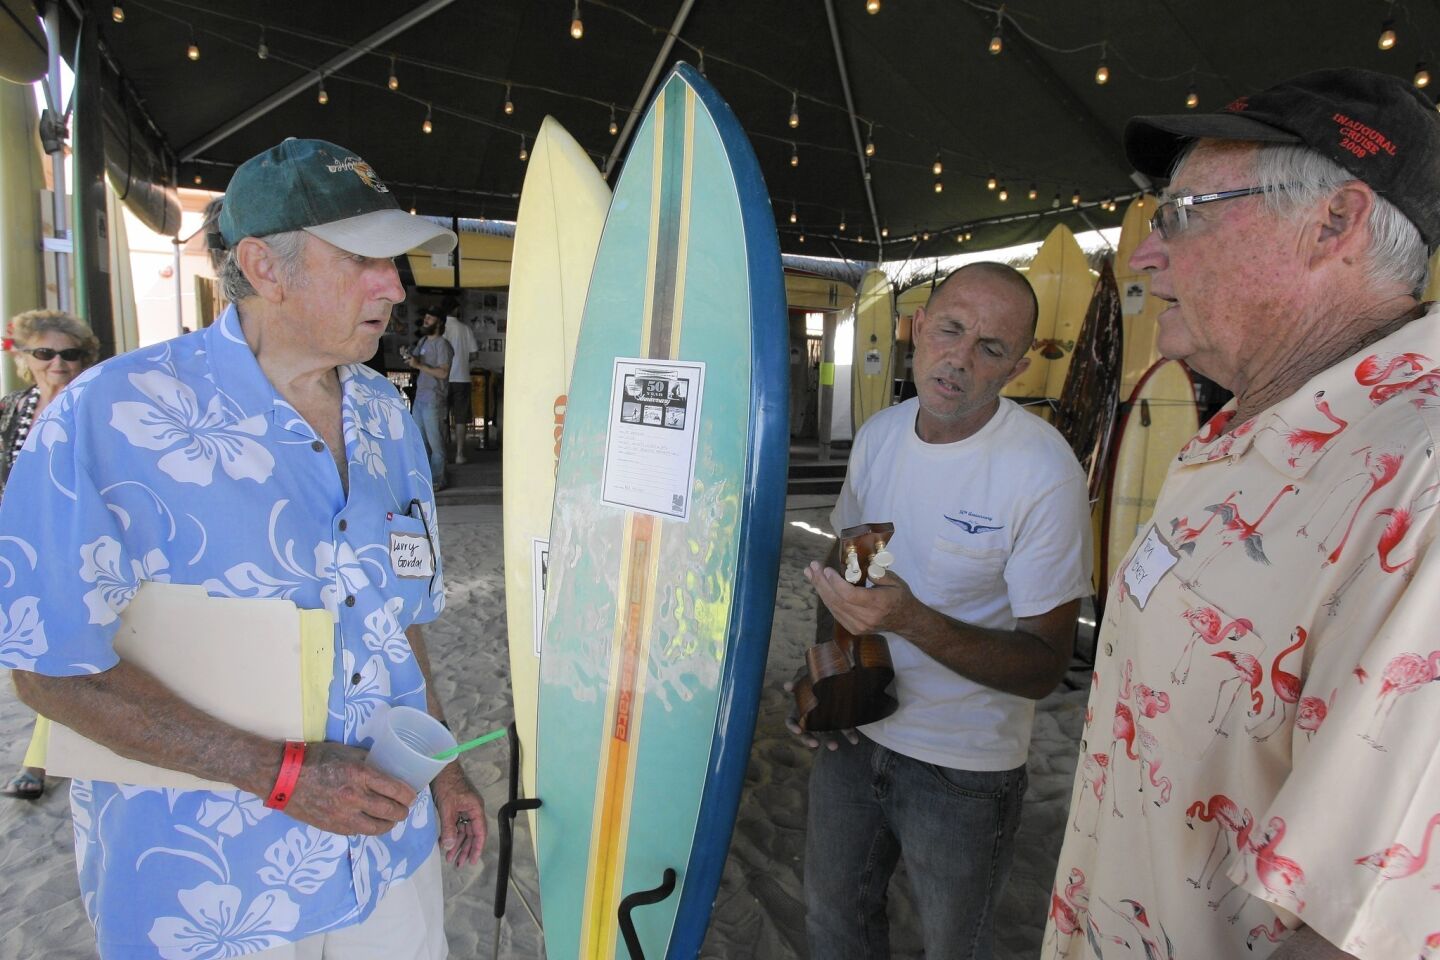 Gordon helped revolutionize surfing with the creation of the foam surfboard. His polyurethane boards were lighter and easier to ride, making surfing accessible -- which helped popularize the sport globally. He was in his 70s. Full obituary